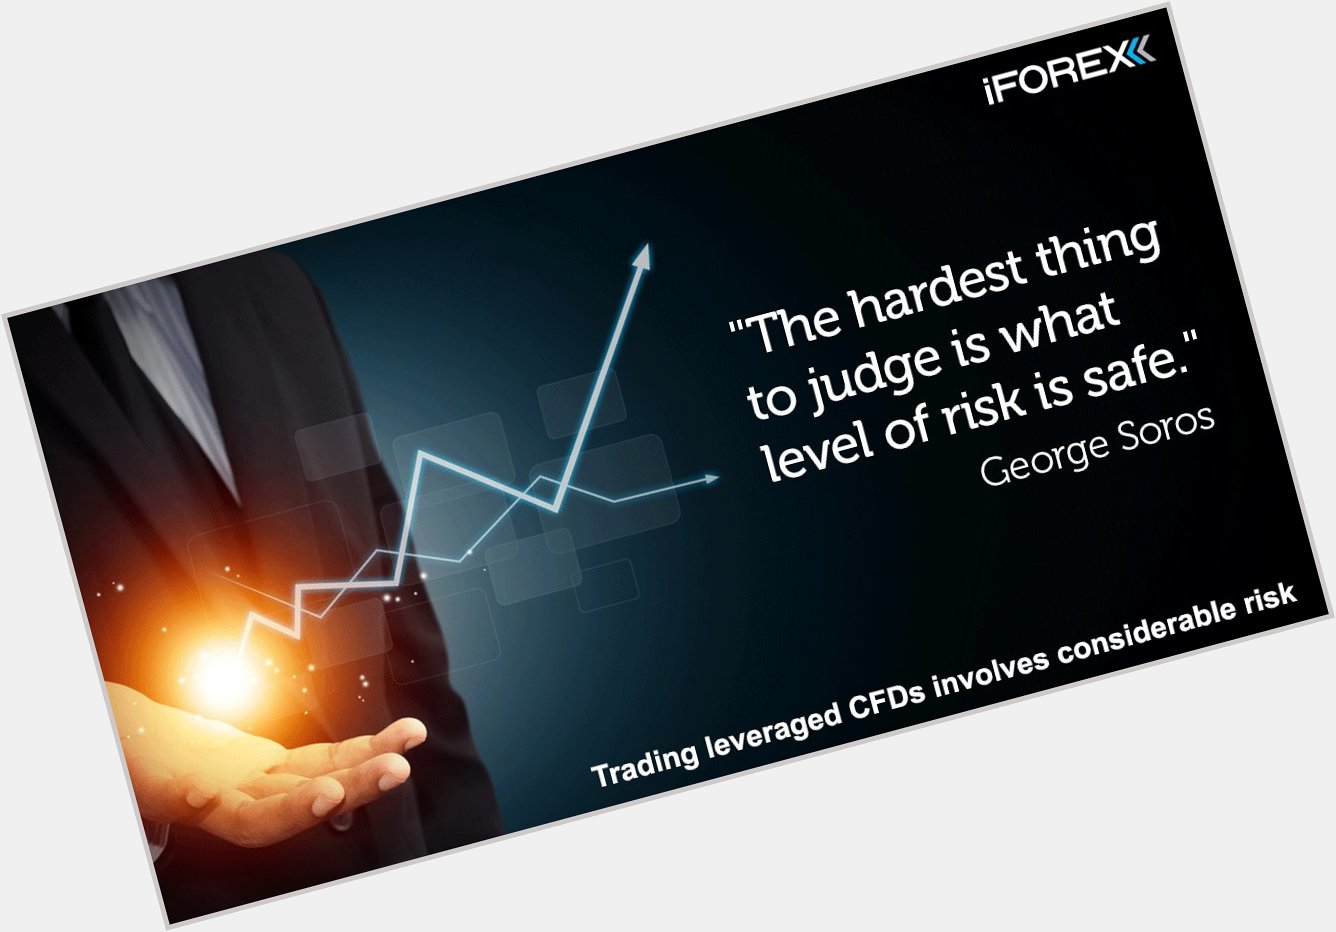 Happy 88th birthday George Soros!
Here\s one of his many great quotes, this one about risk 

*Capital @ risk 